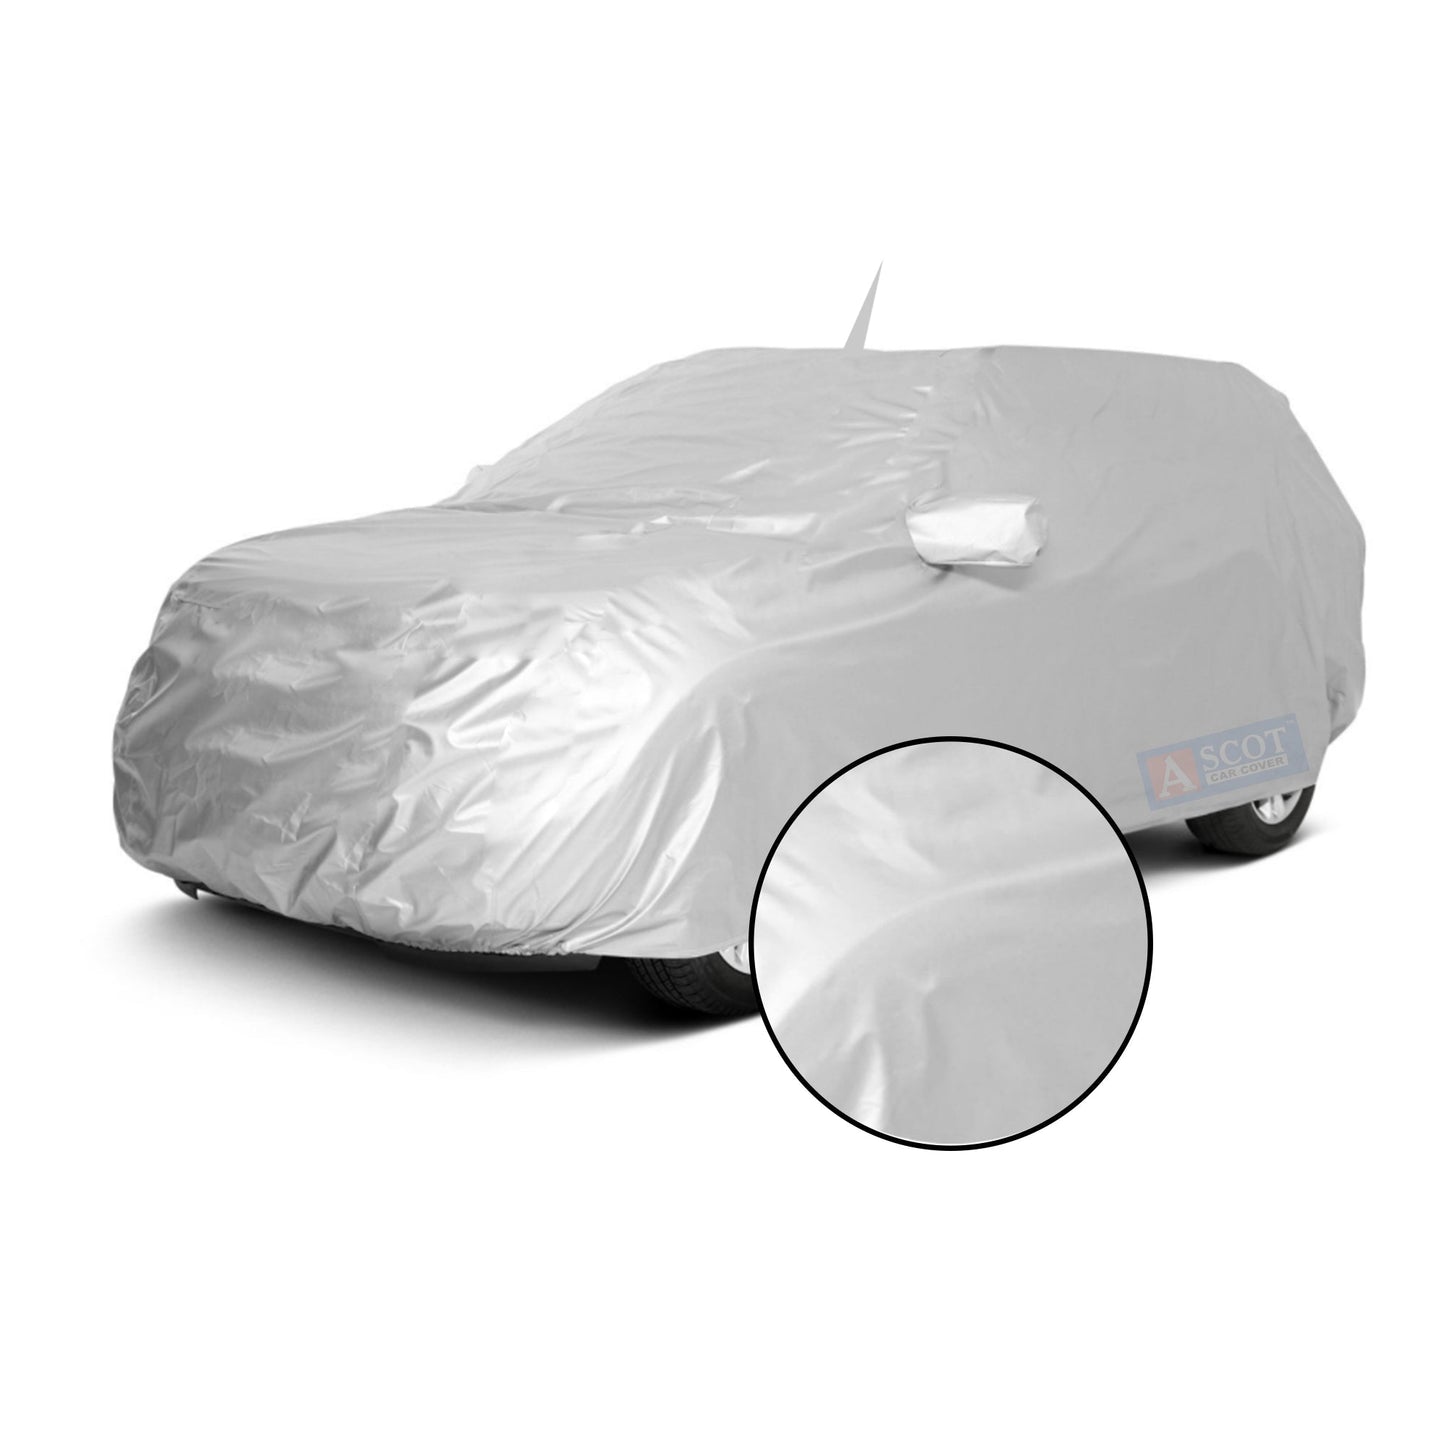 Ascot Hyundai Verna 2011-2017 Model Car Body Cover Dust Proof, Trippel Stitched